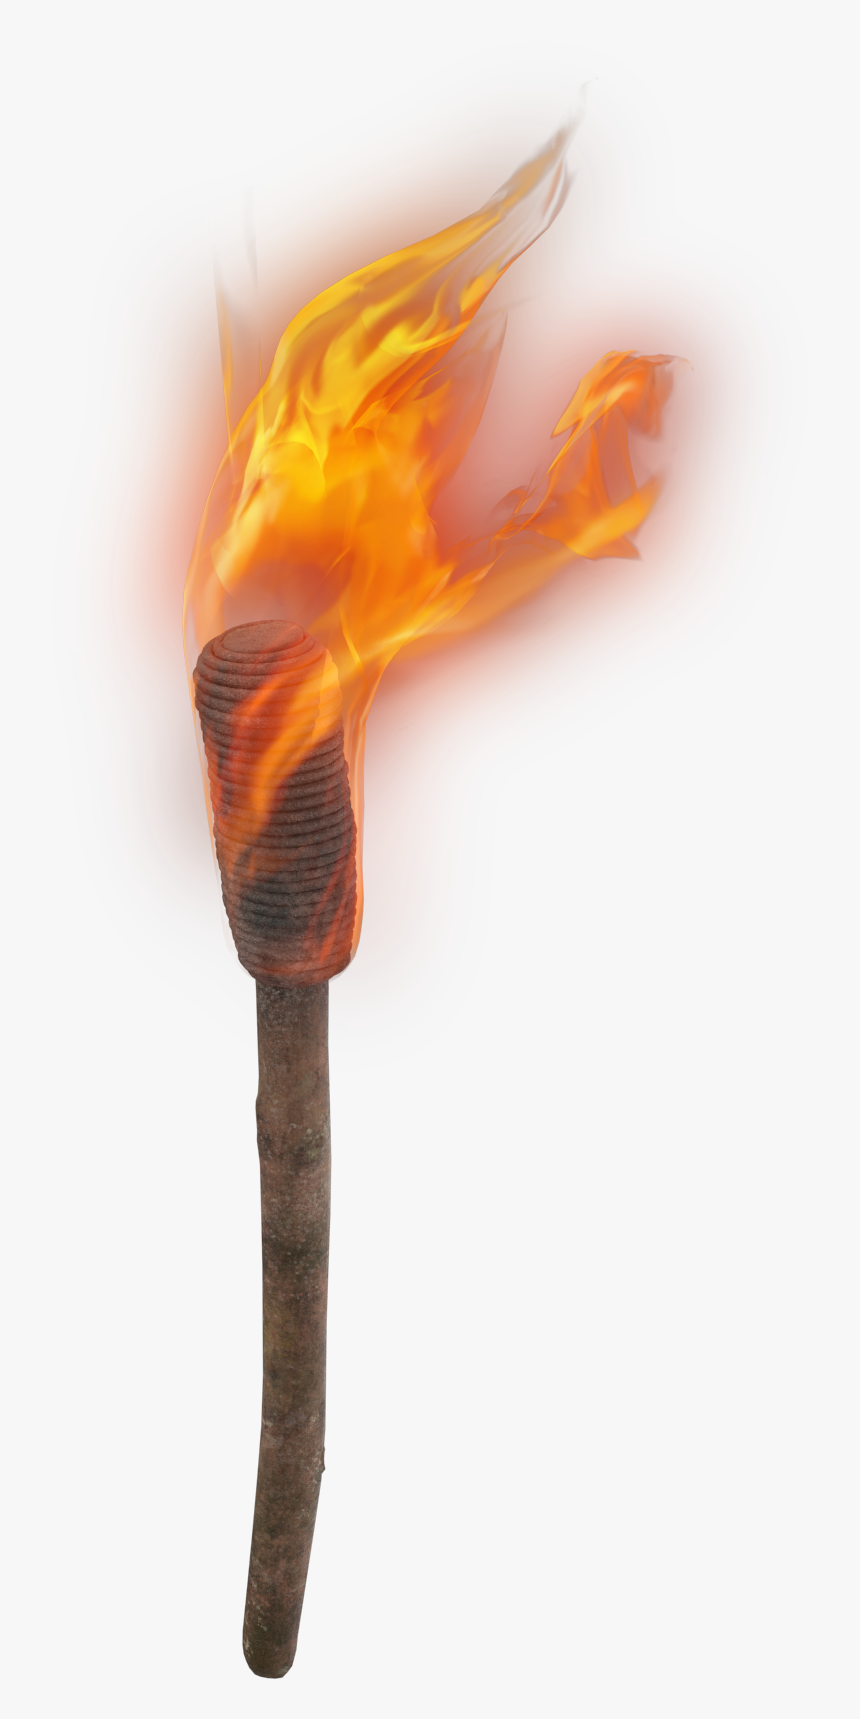 Hand Torch - Transparent Fire Torch, HD Png Download, Free Download